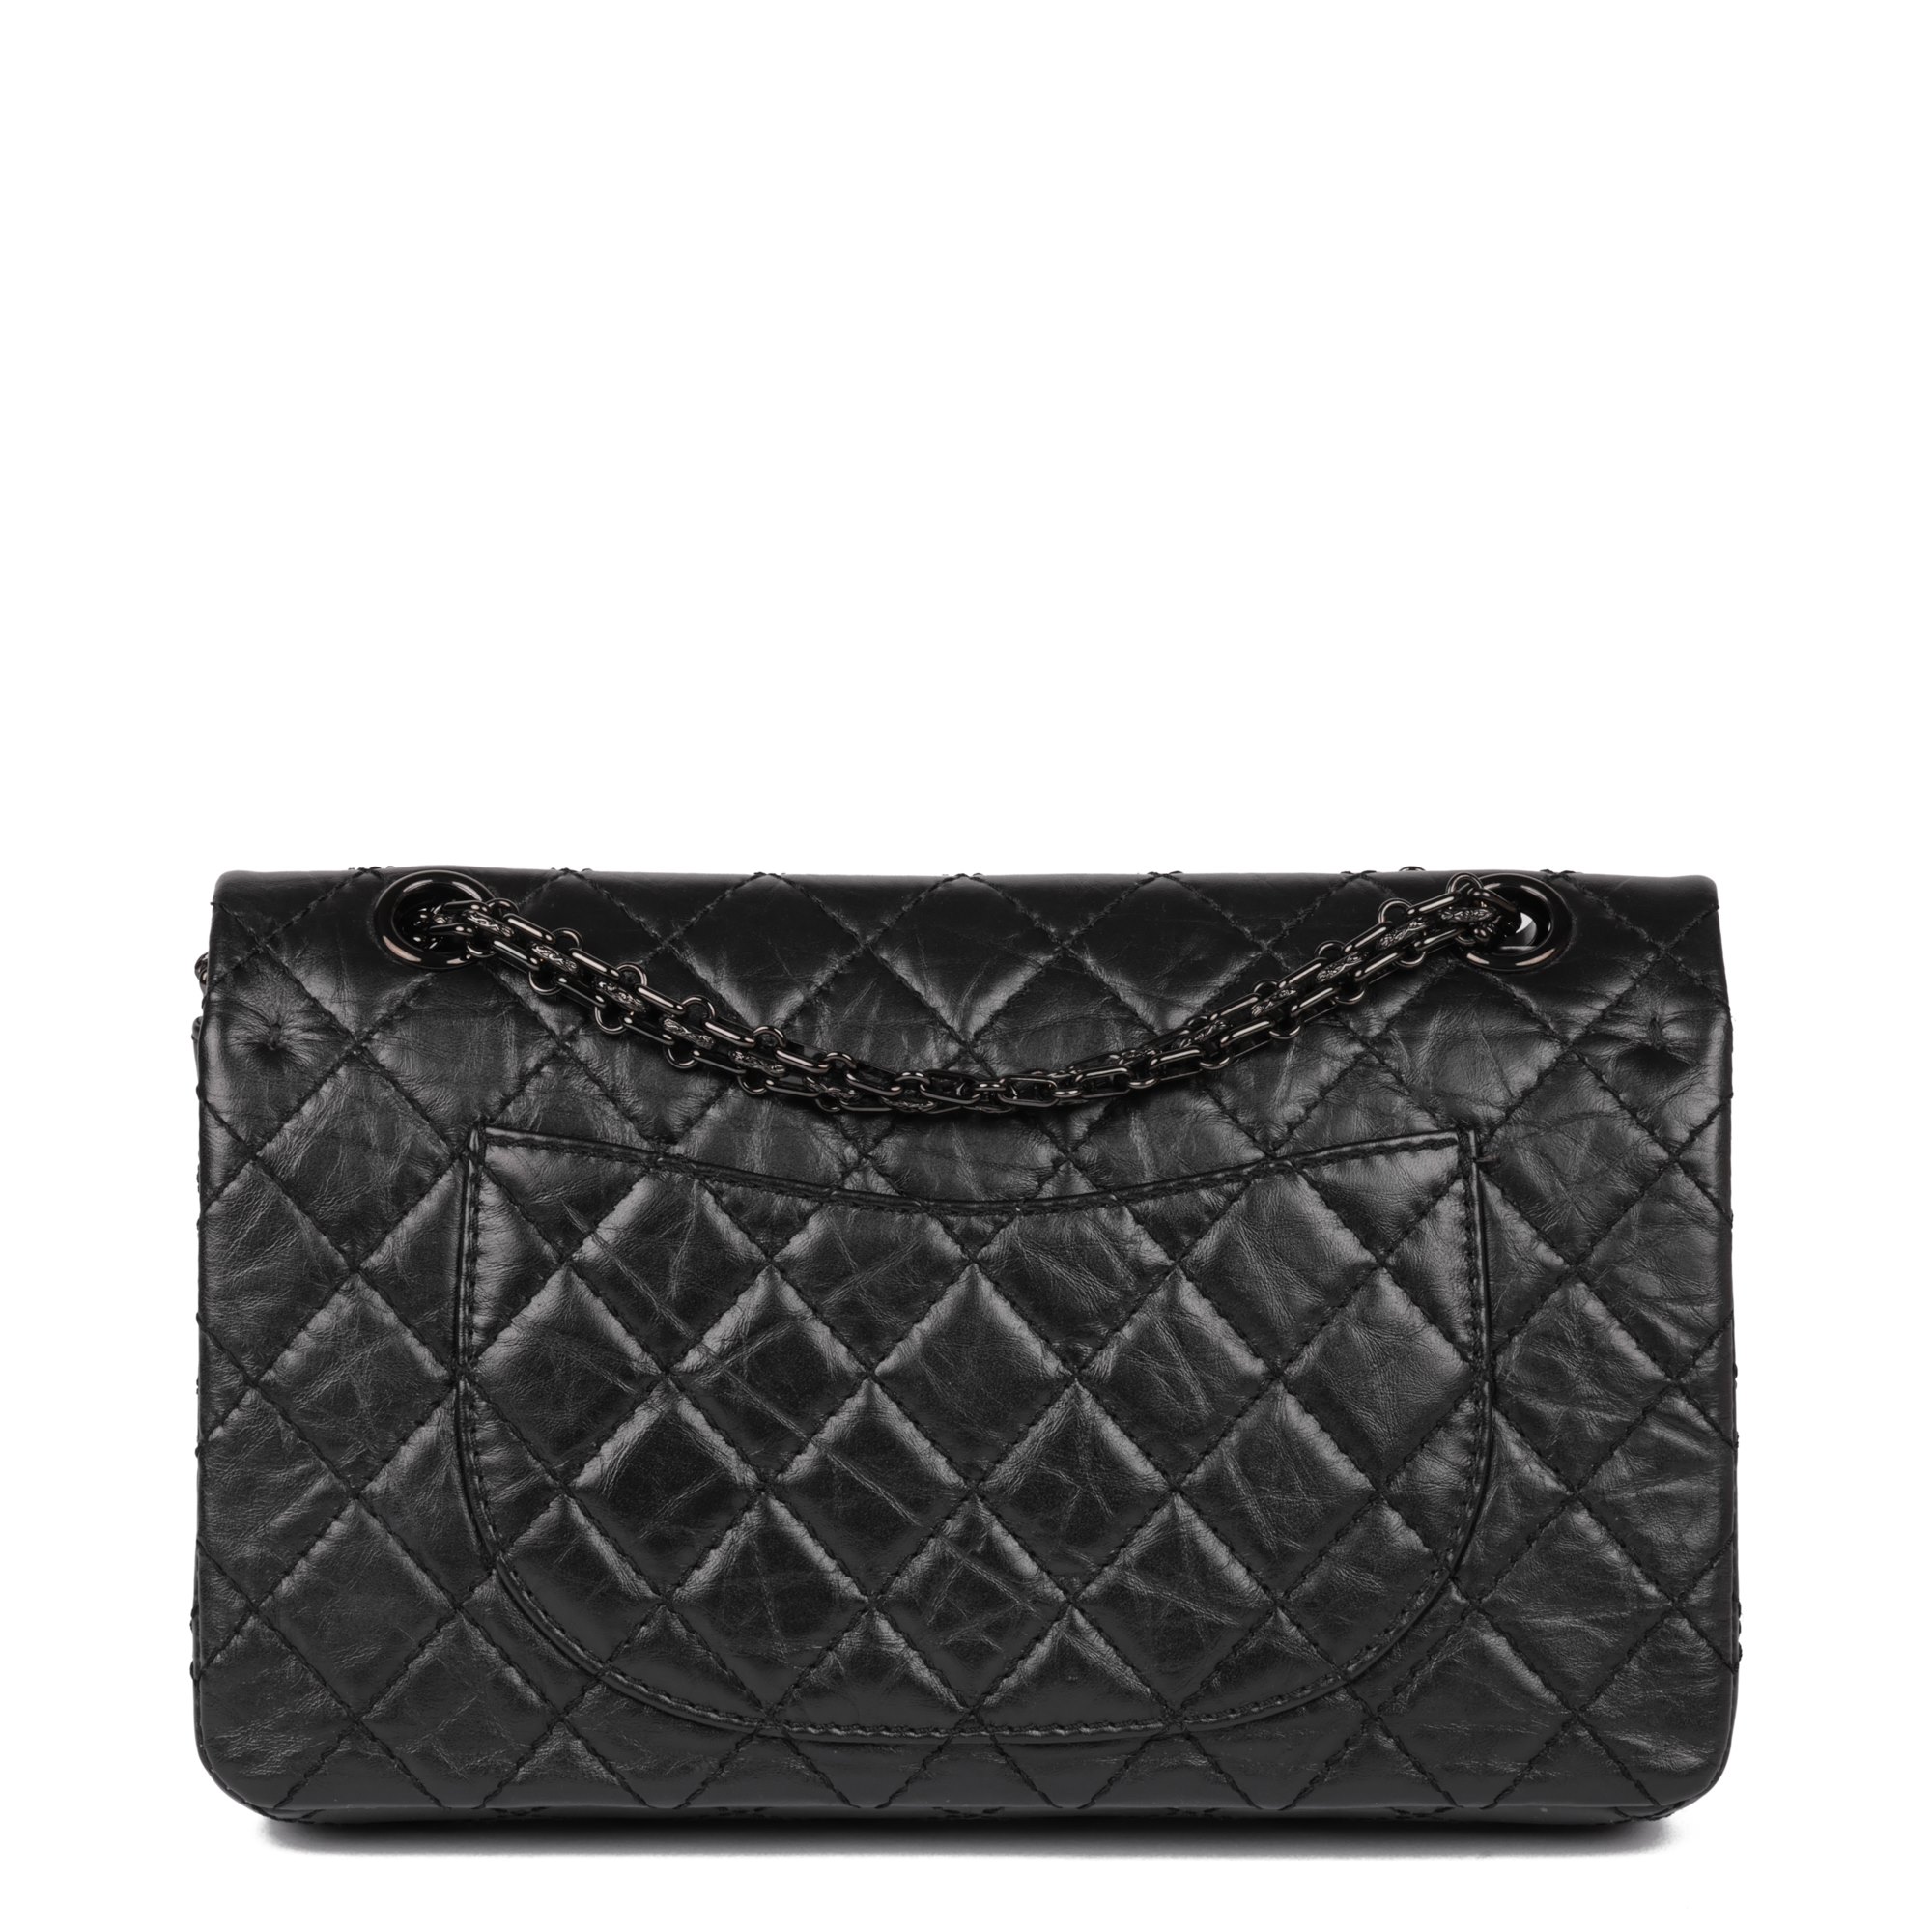 Chanel Black Quilted Aged Calfskin Leather Reissue 2.55 Reissue 225 Double Flap Bag